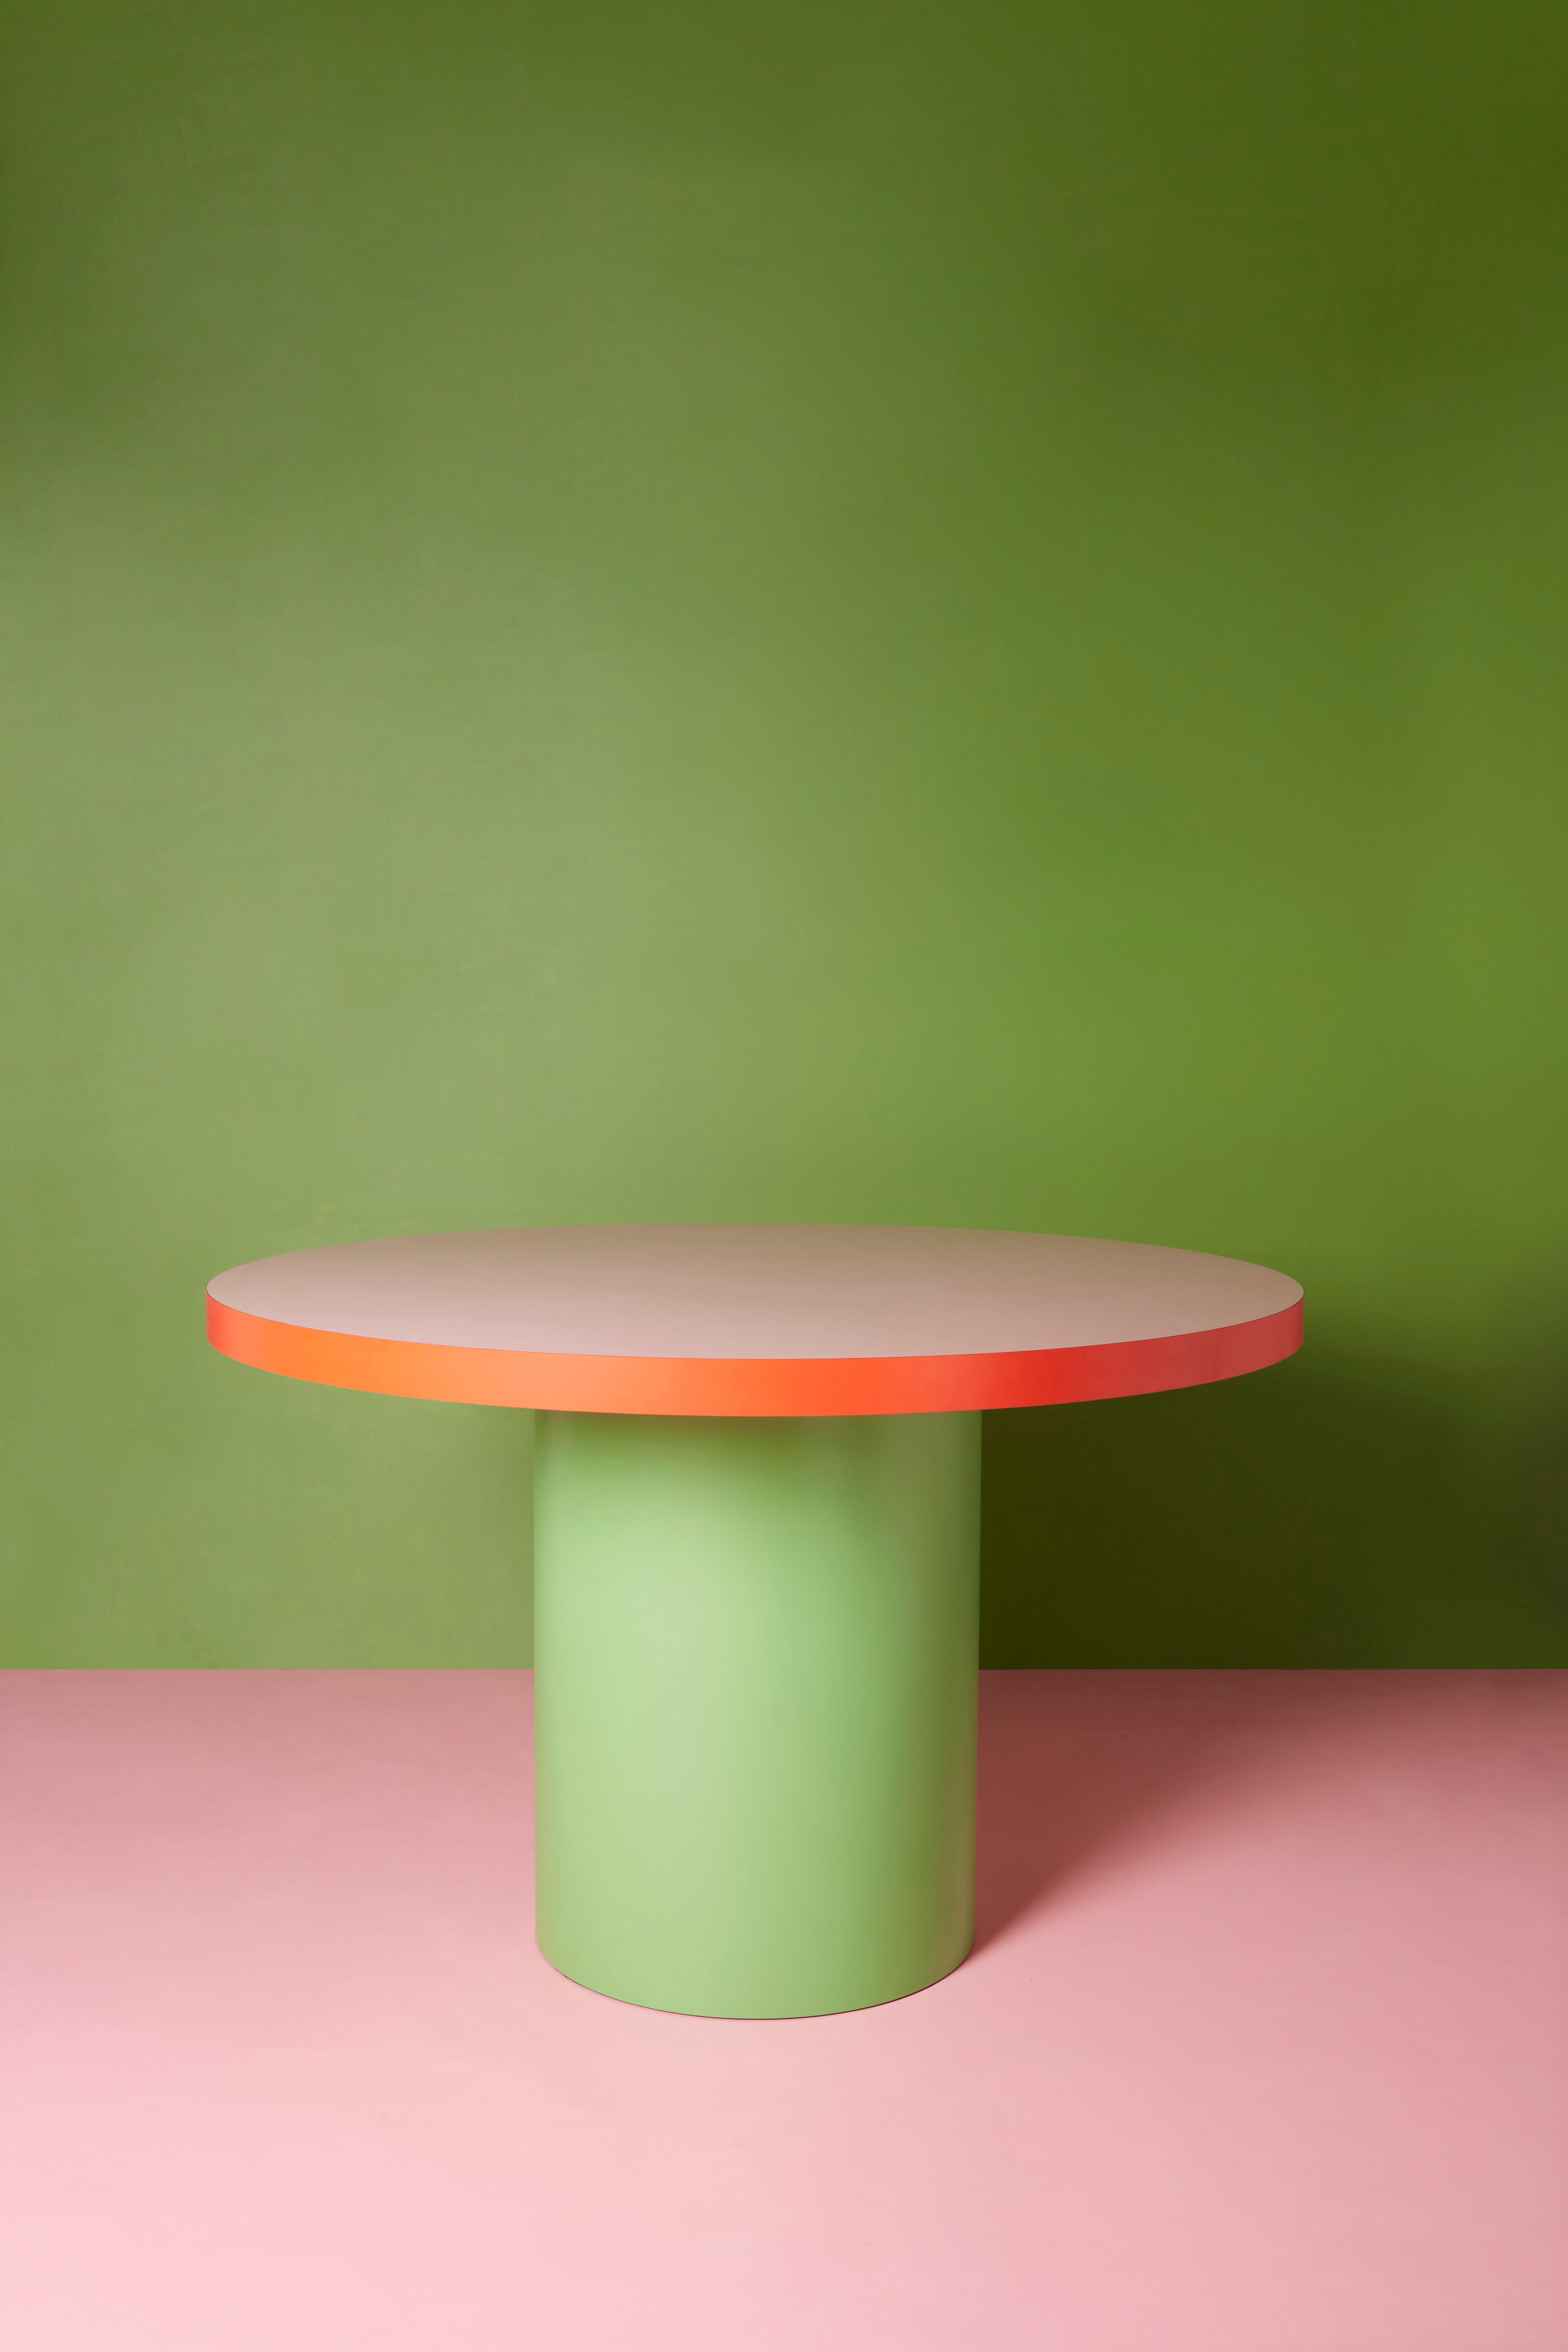 TAGADA´ Round Table by Stamuli, Green, Pink, Red For Sale 2